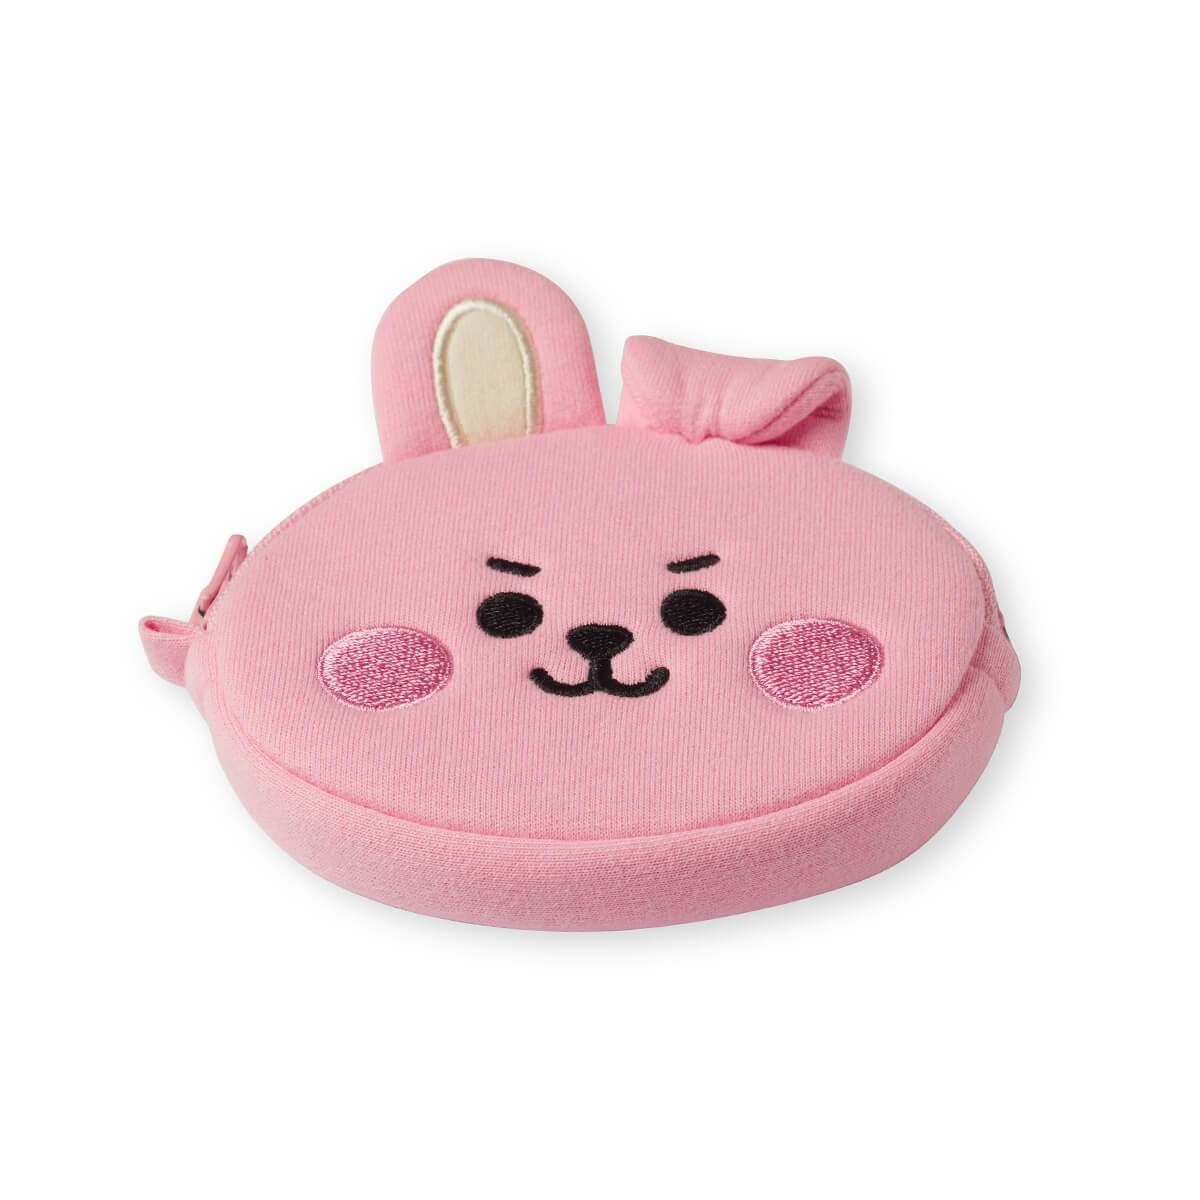 BT21 COOKY Baby Necklace Mini Pouch